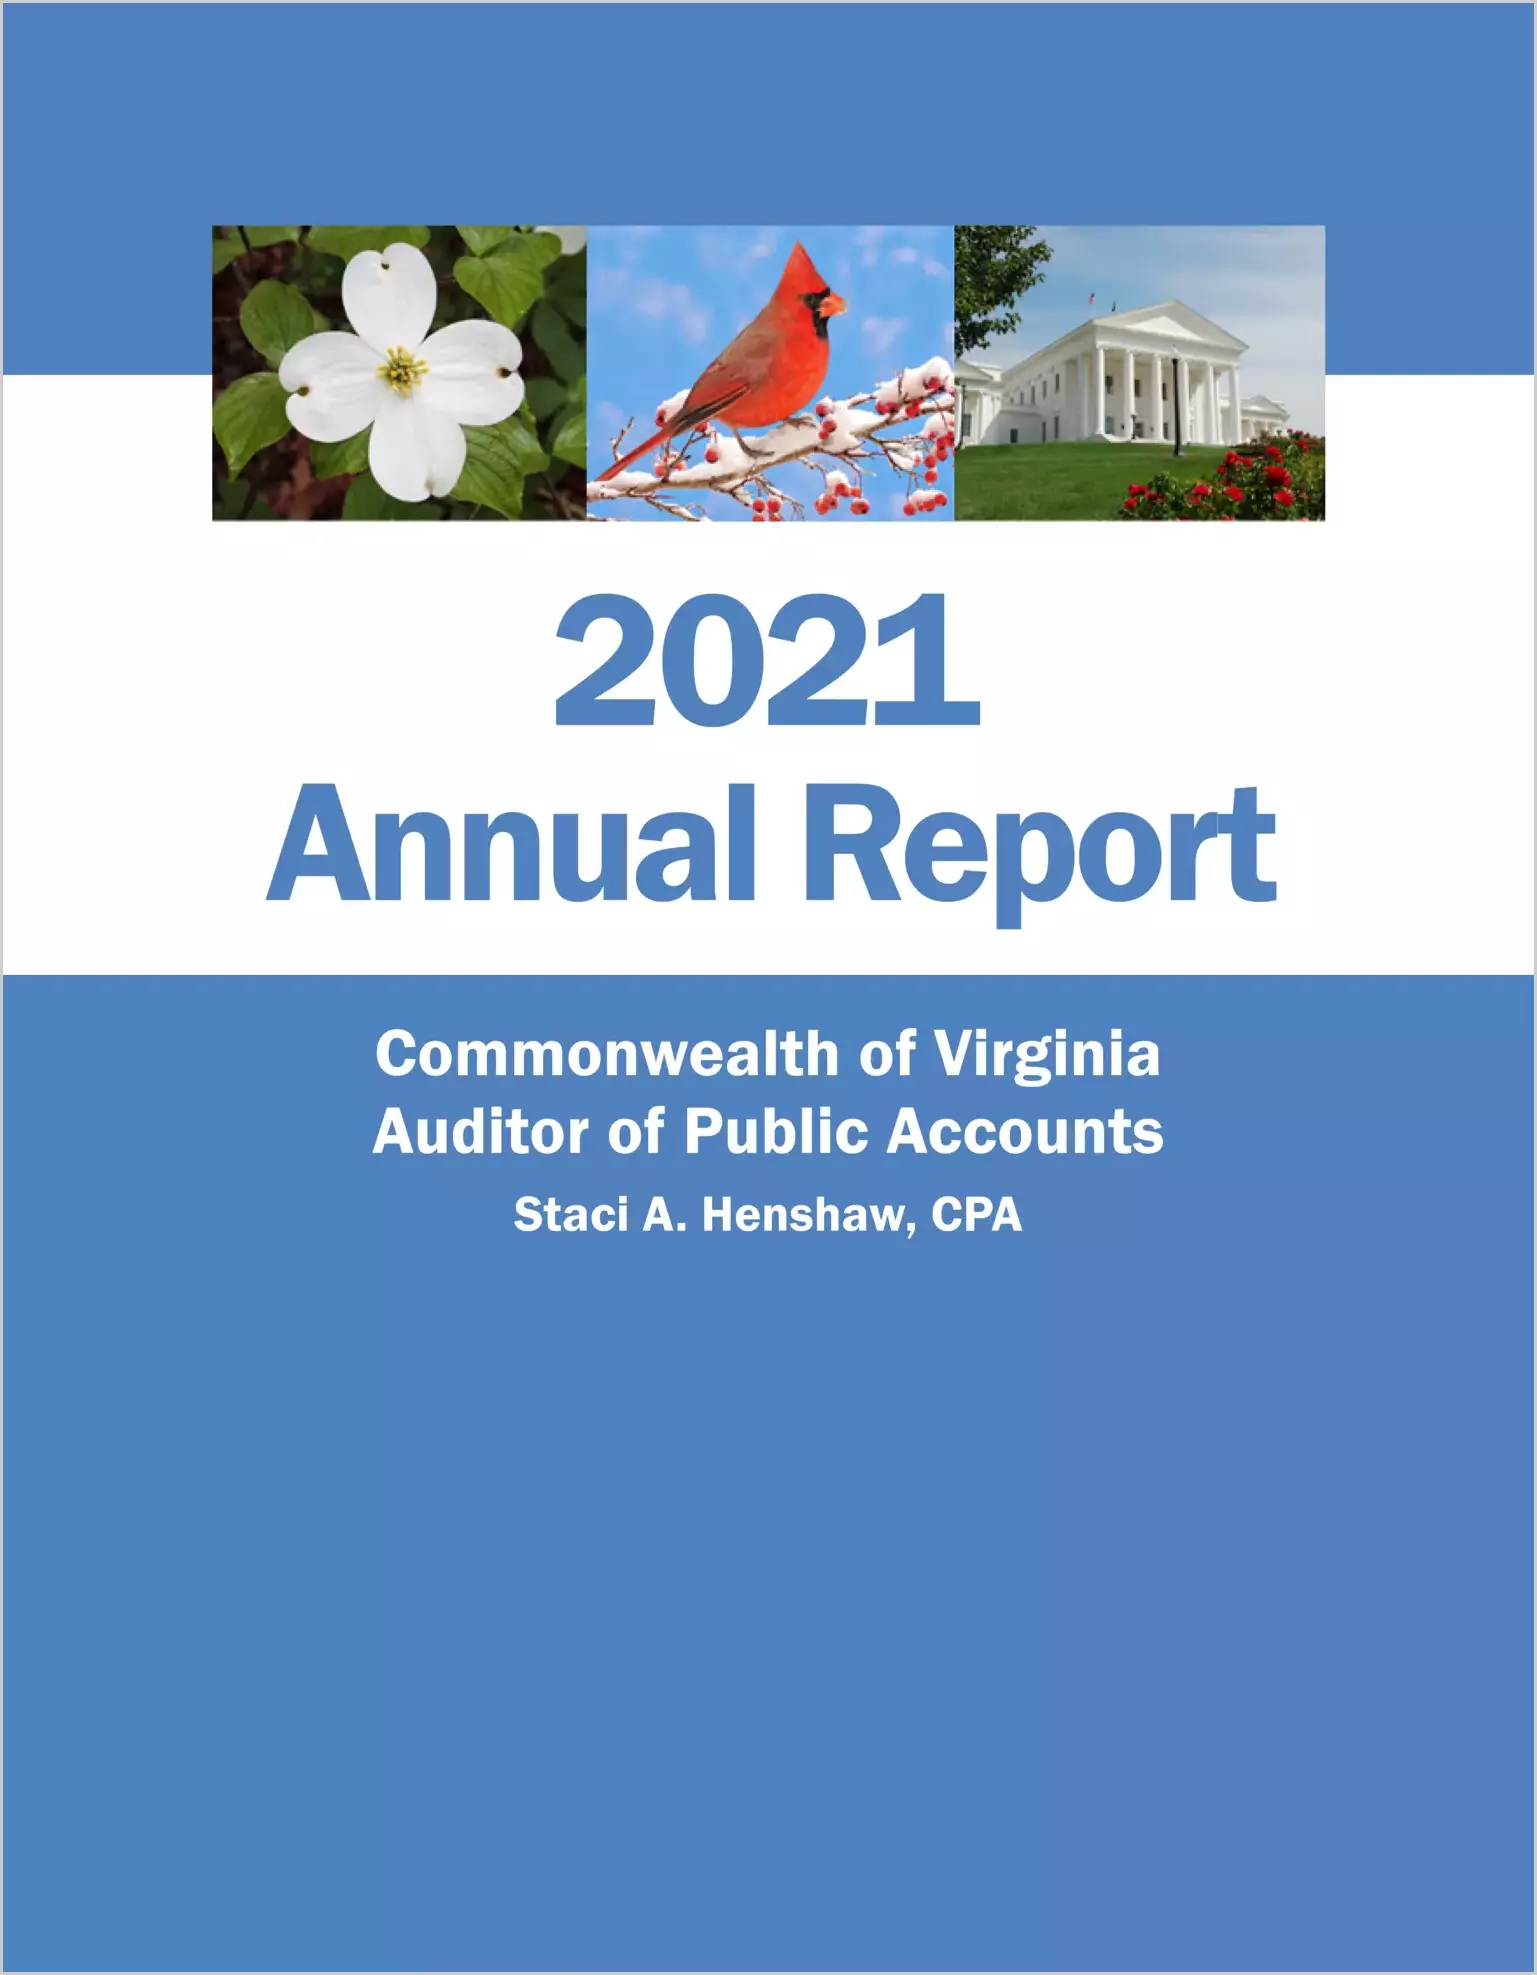 2021 Annual Report of the Auditor of Public Accounts